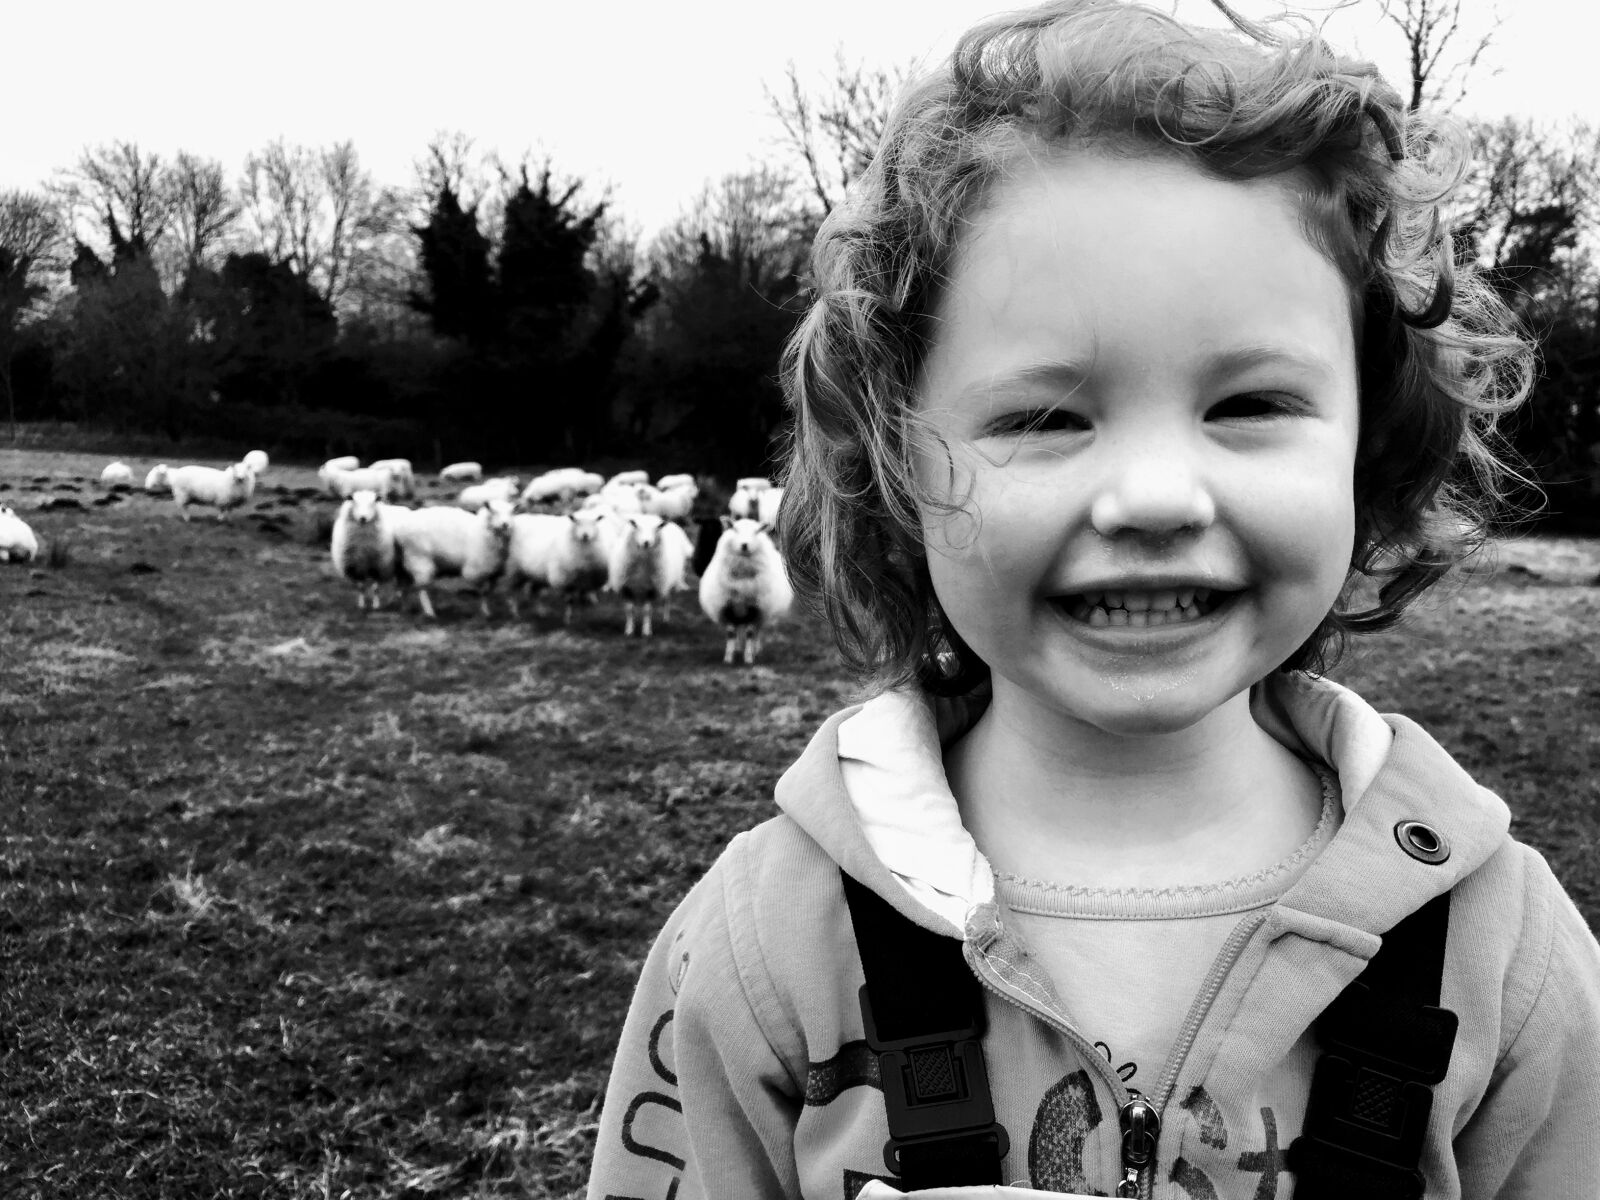 Apple iPhone 6 sample photo. Sheep, girl, country photography